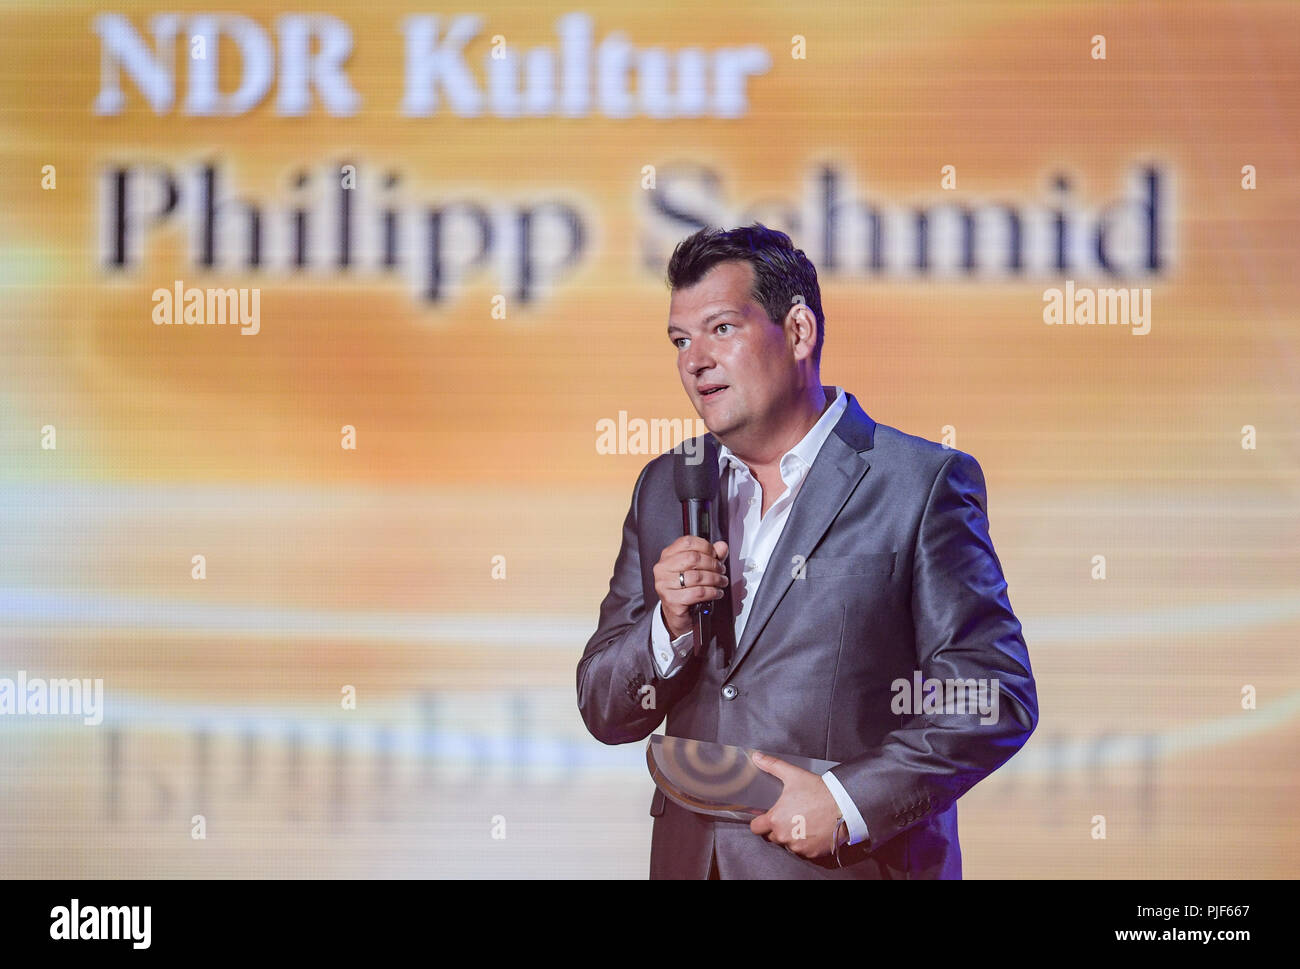 Hamburg, Germany. 06th Sep, 2018. 06.09.2018, Hamburg: Philipp Schmid,  presenter of the programme "Klassisch in den Tag" on NDR Kultur, will be on  stage at the award ceremony for the radio prize.